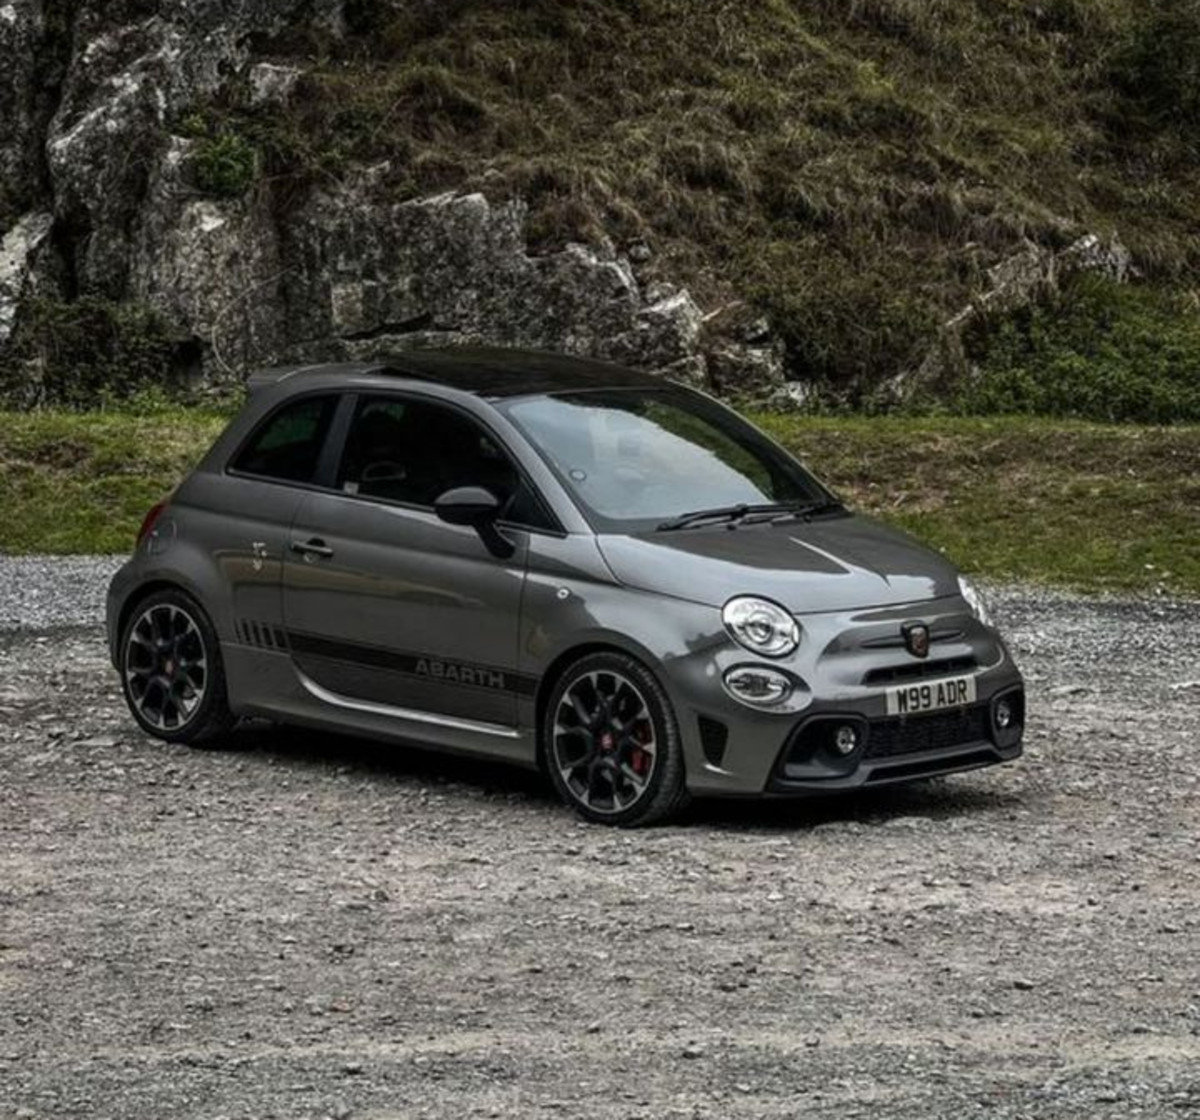 New Abarth 595 and Abarth 695 - Performance is a matter of choices.